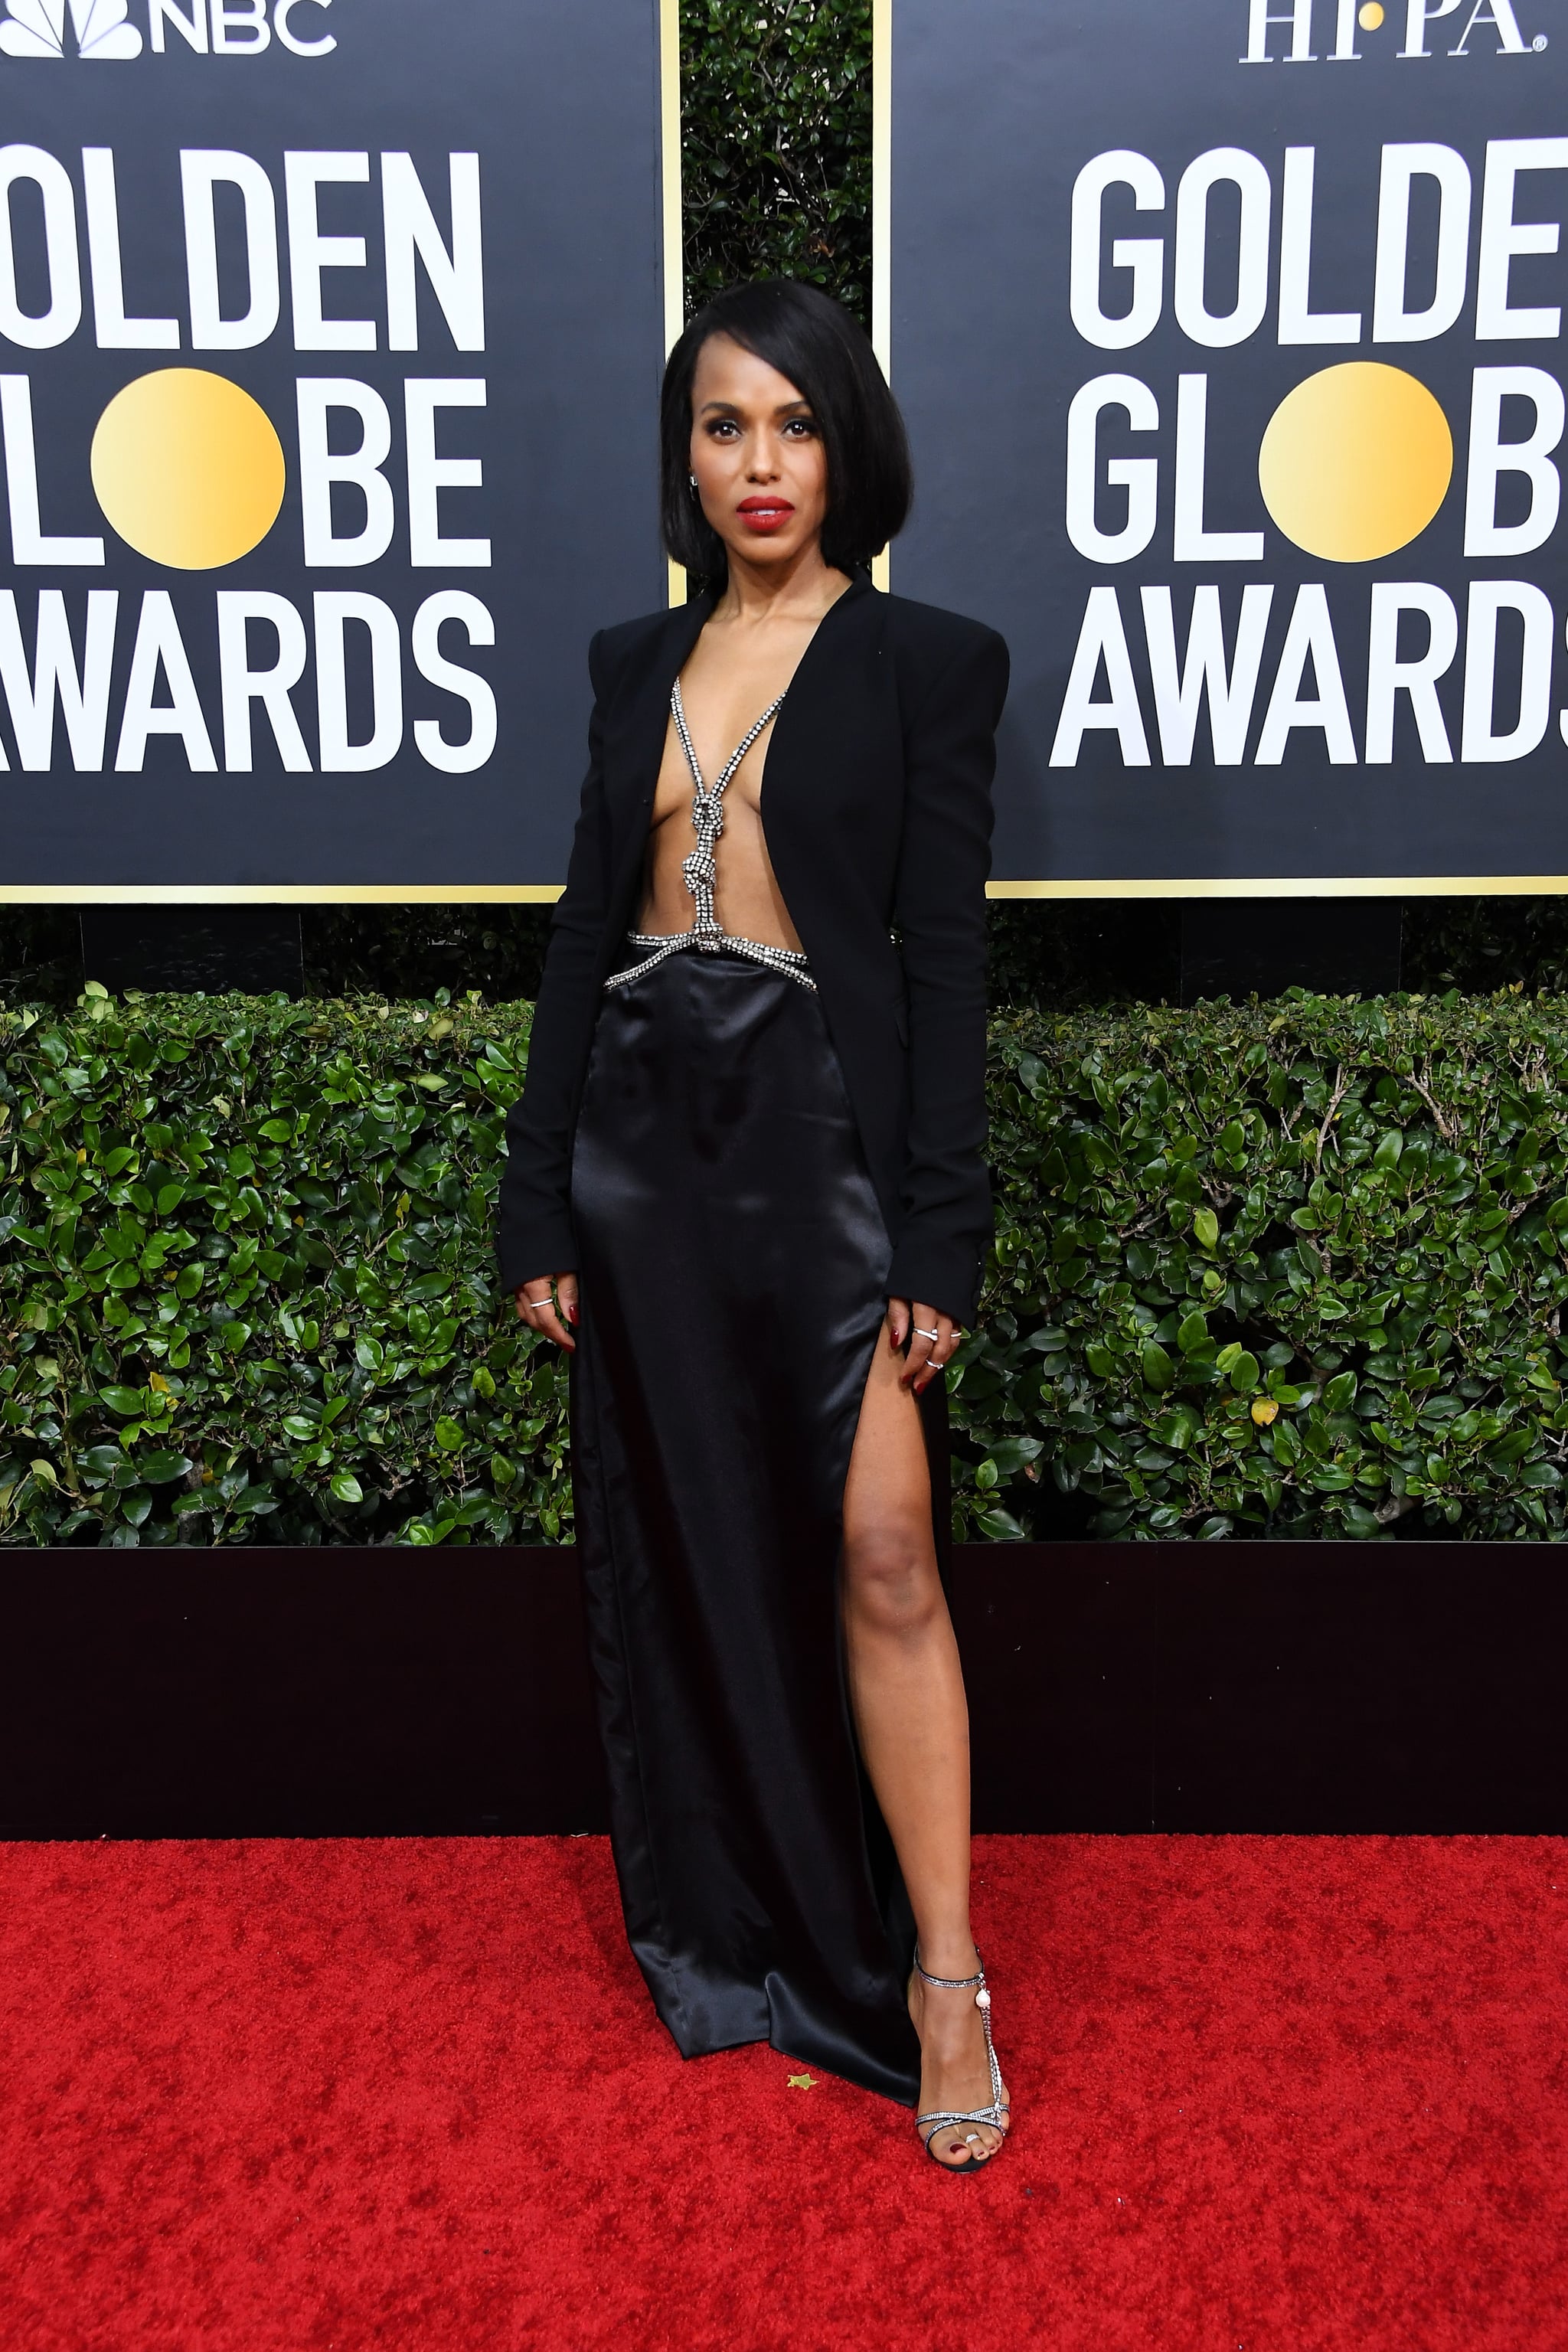 Kerry Washington's Bra-Less Blazer and Silk Skirt at the 2020 Golden Globes, 7 Extraordinary Golden Globes Dresses Wild Enough to Dream About